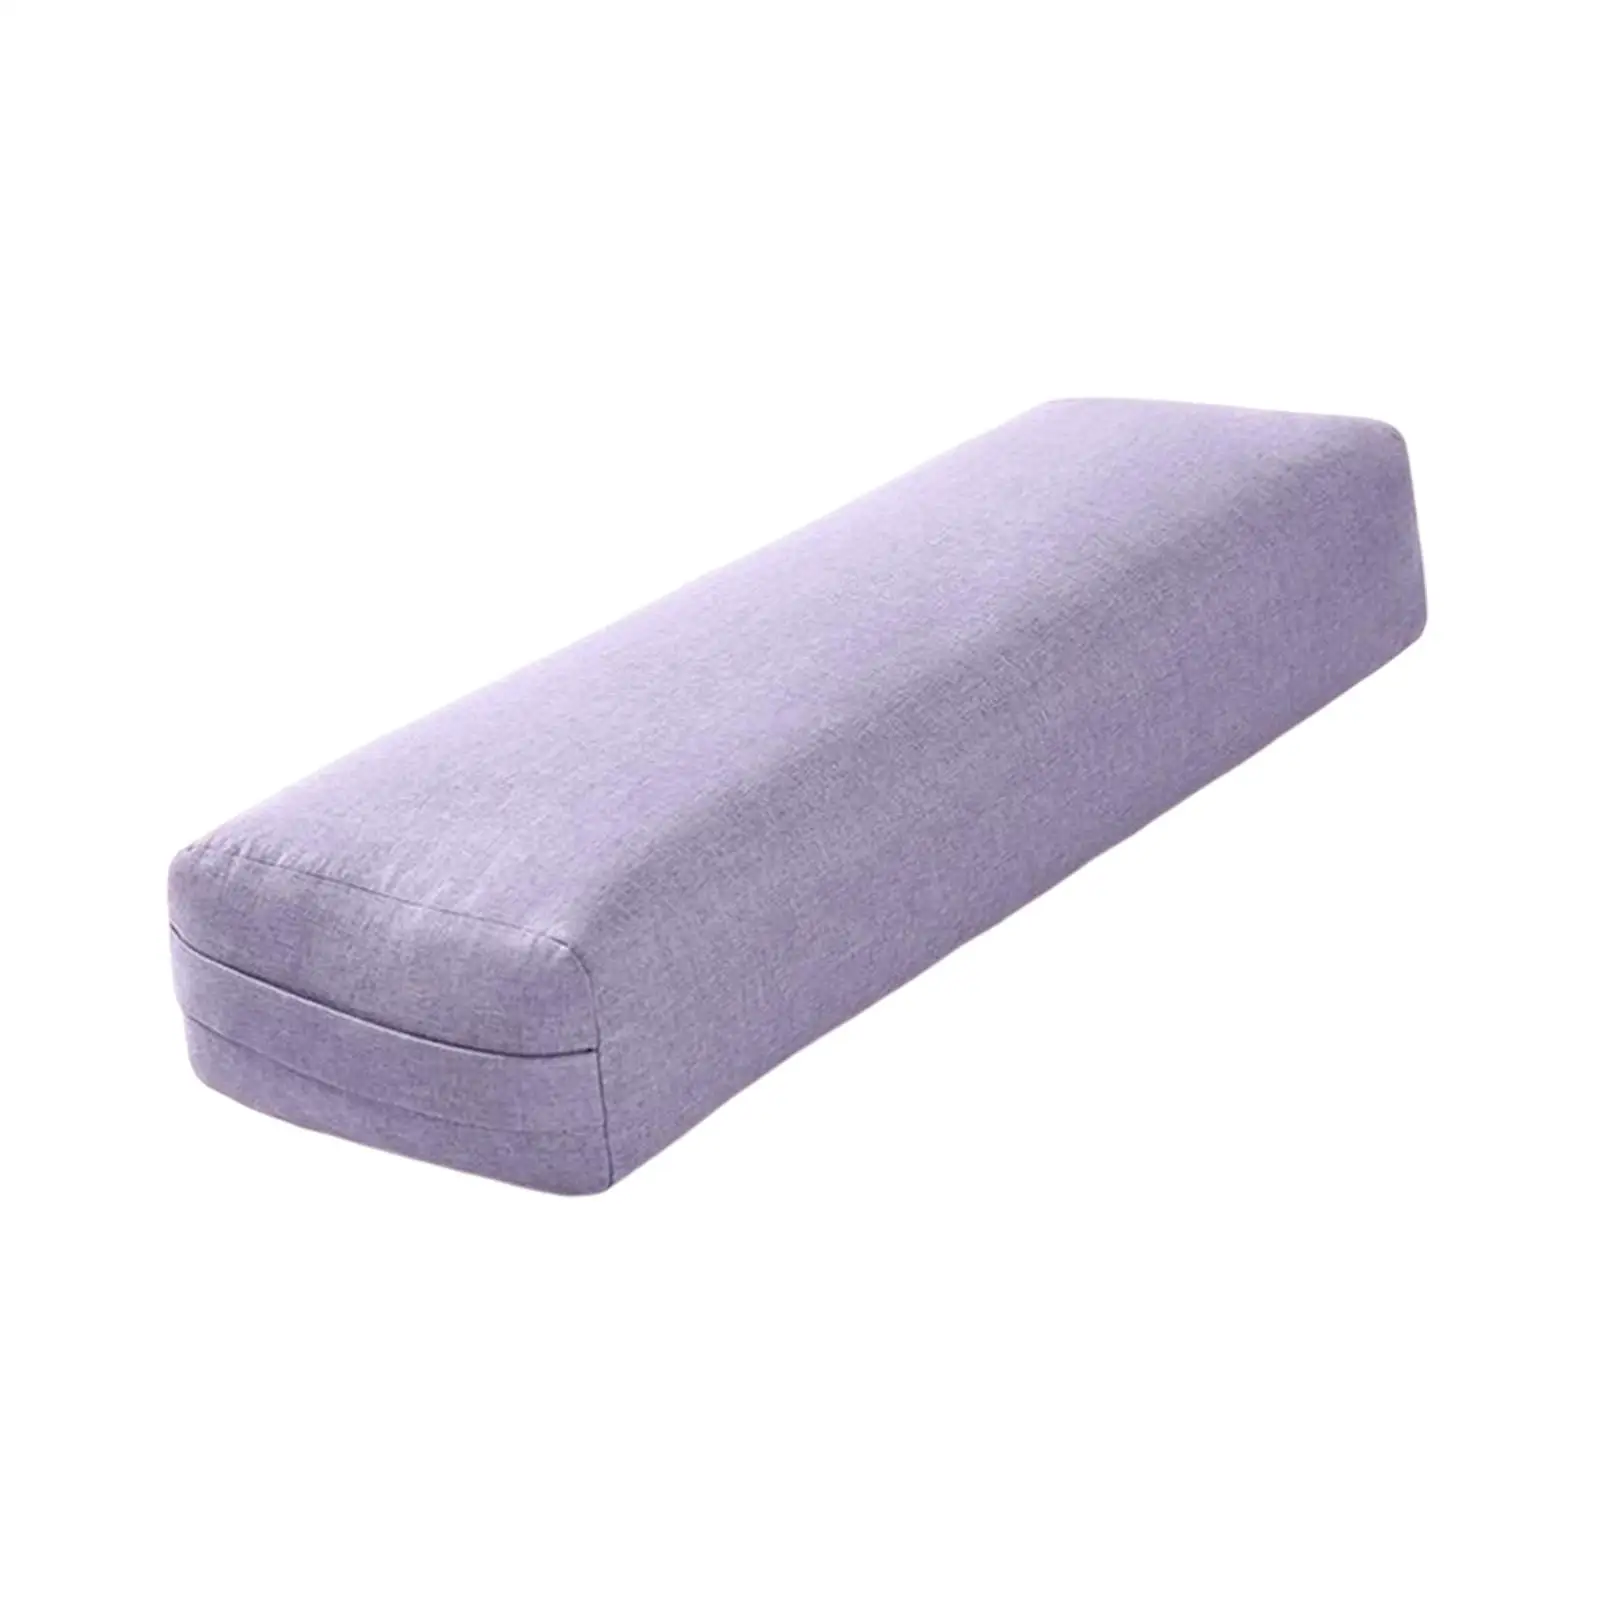 Yoga bolster, removable, washable cover, yoga pillow for relaxing